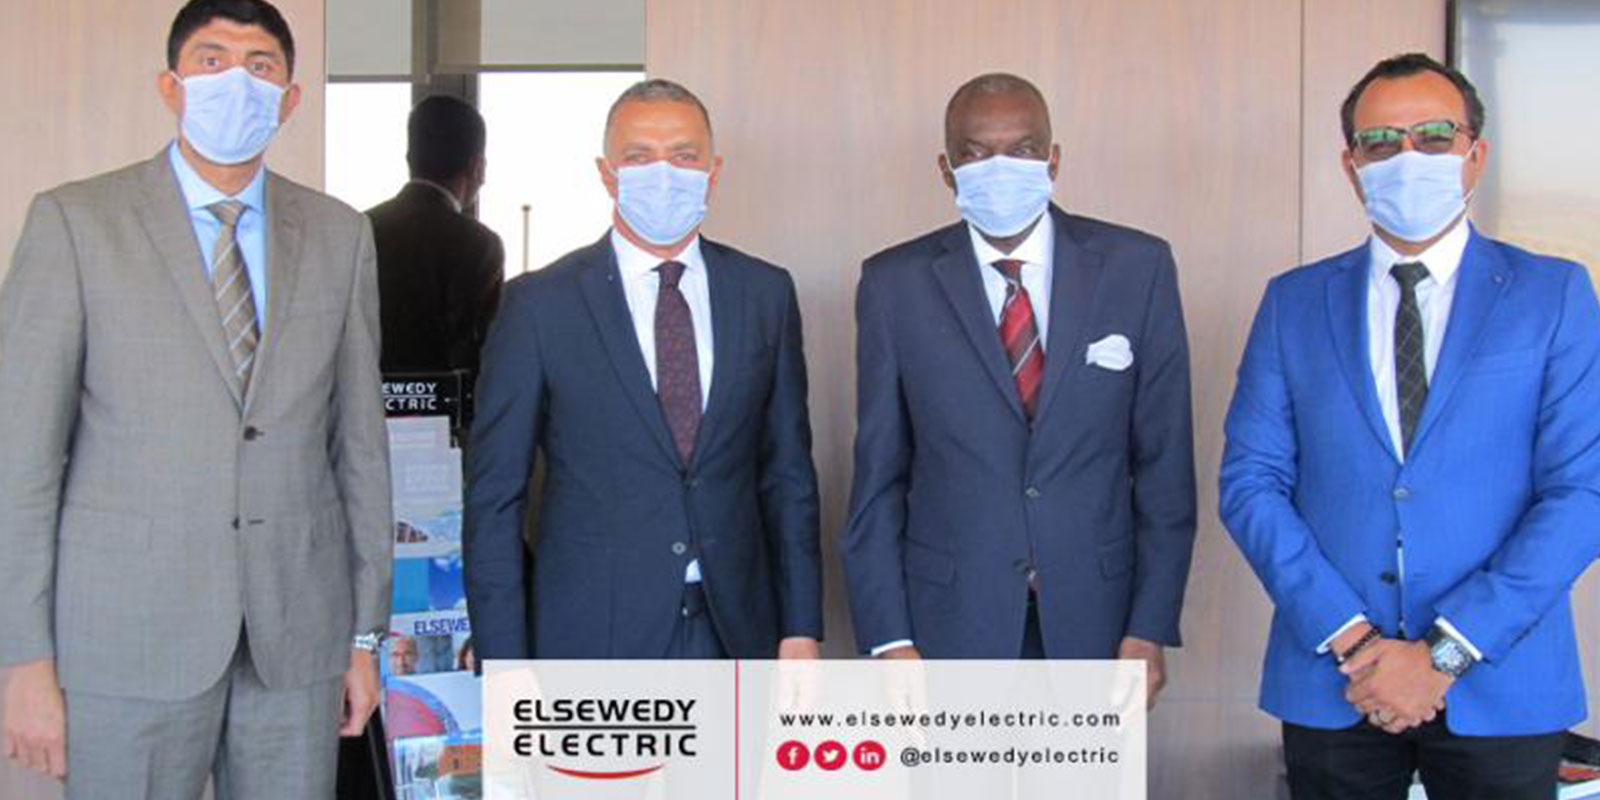 Elsewedy Electric supports Angola’s fight against covid-19